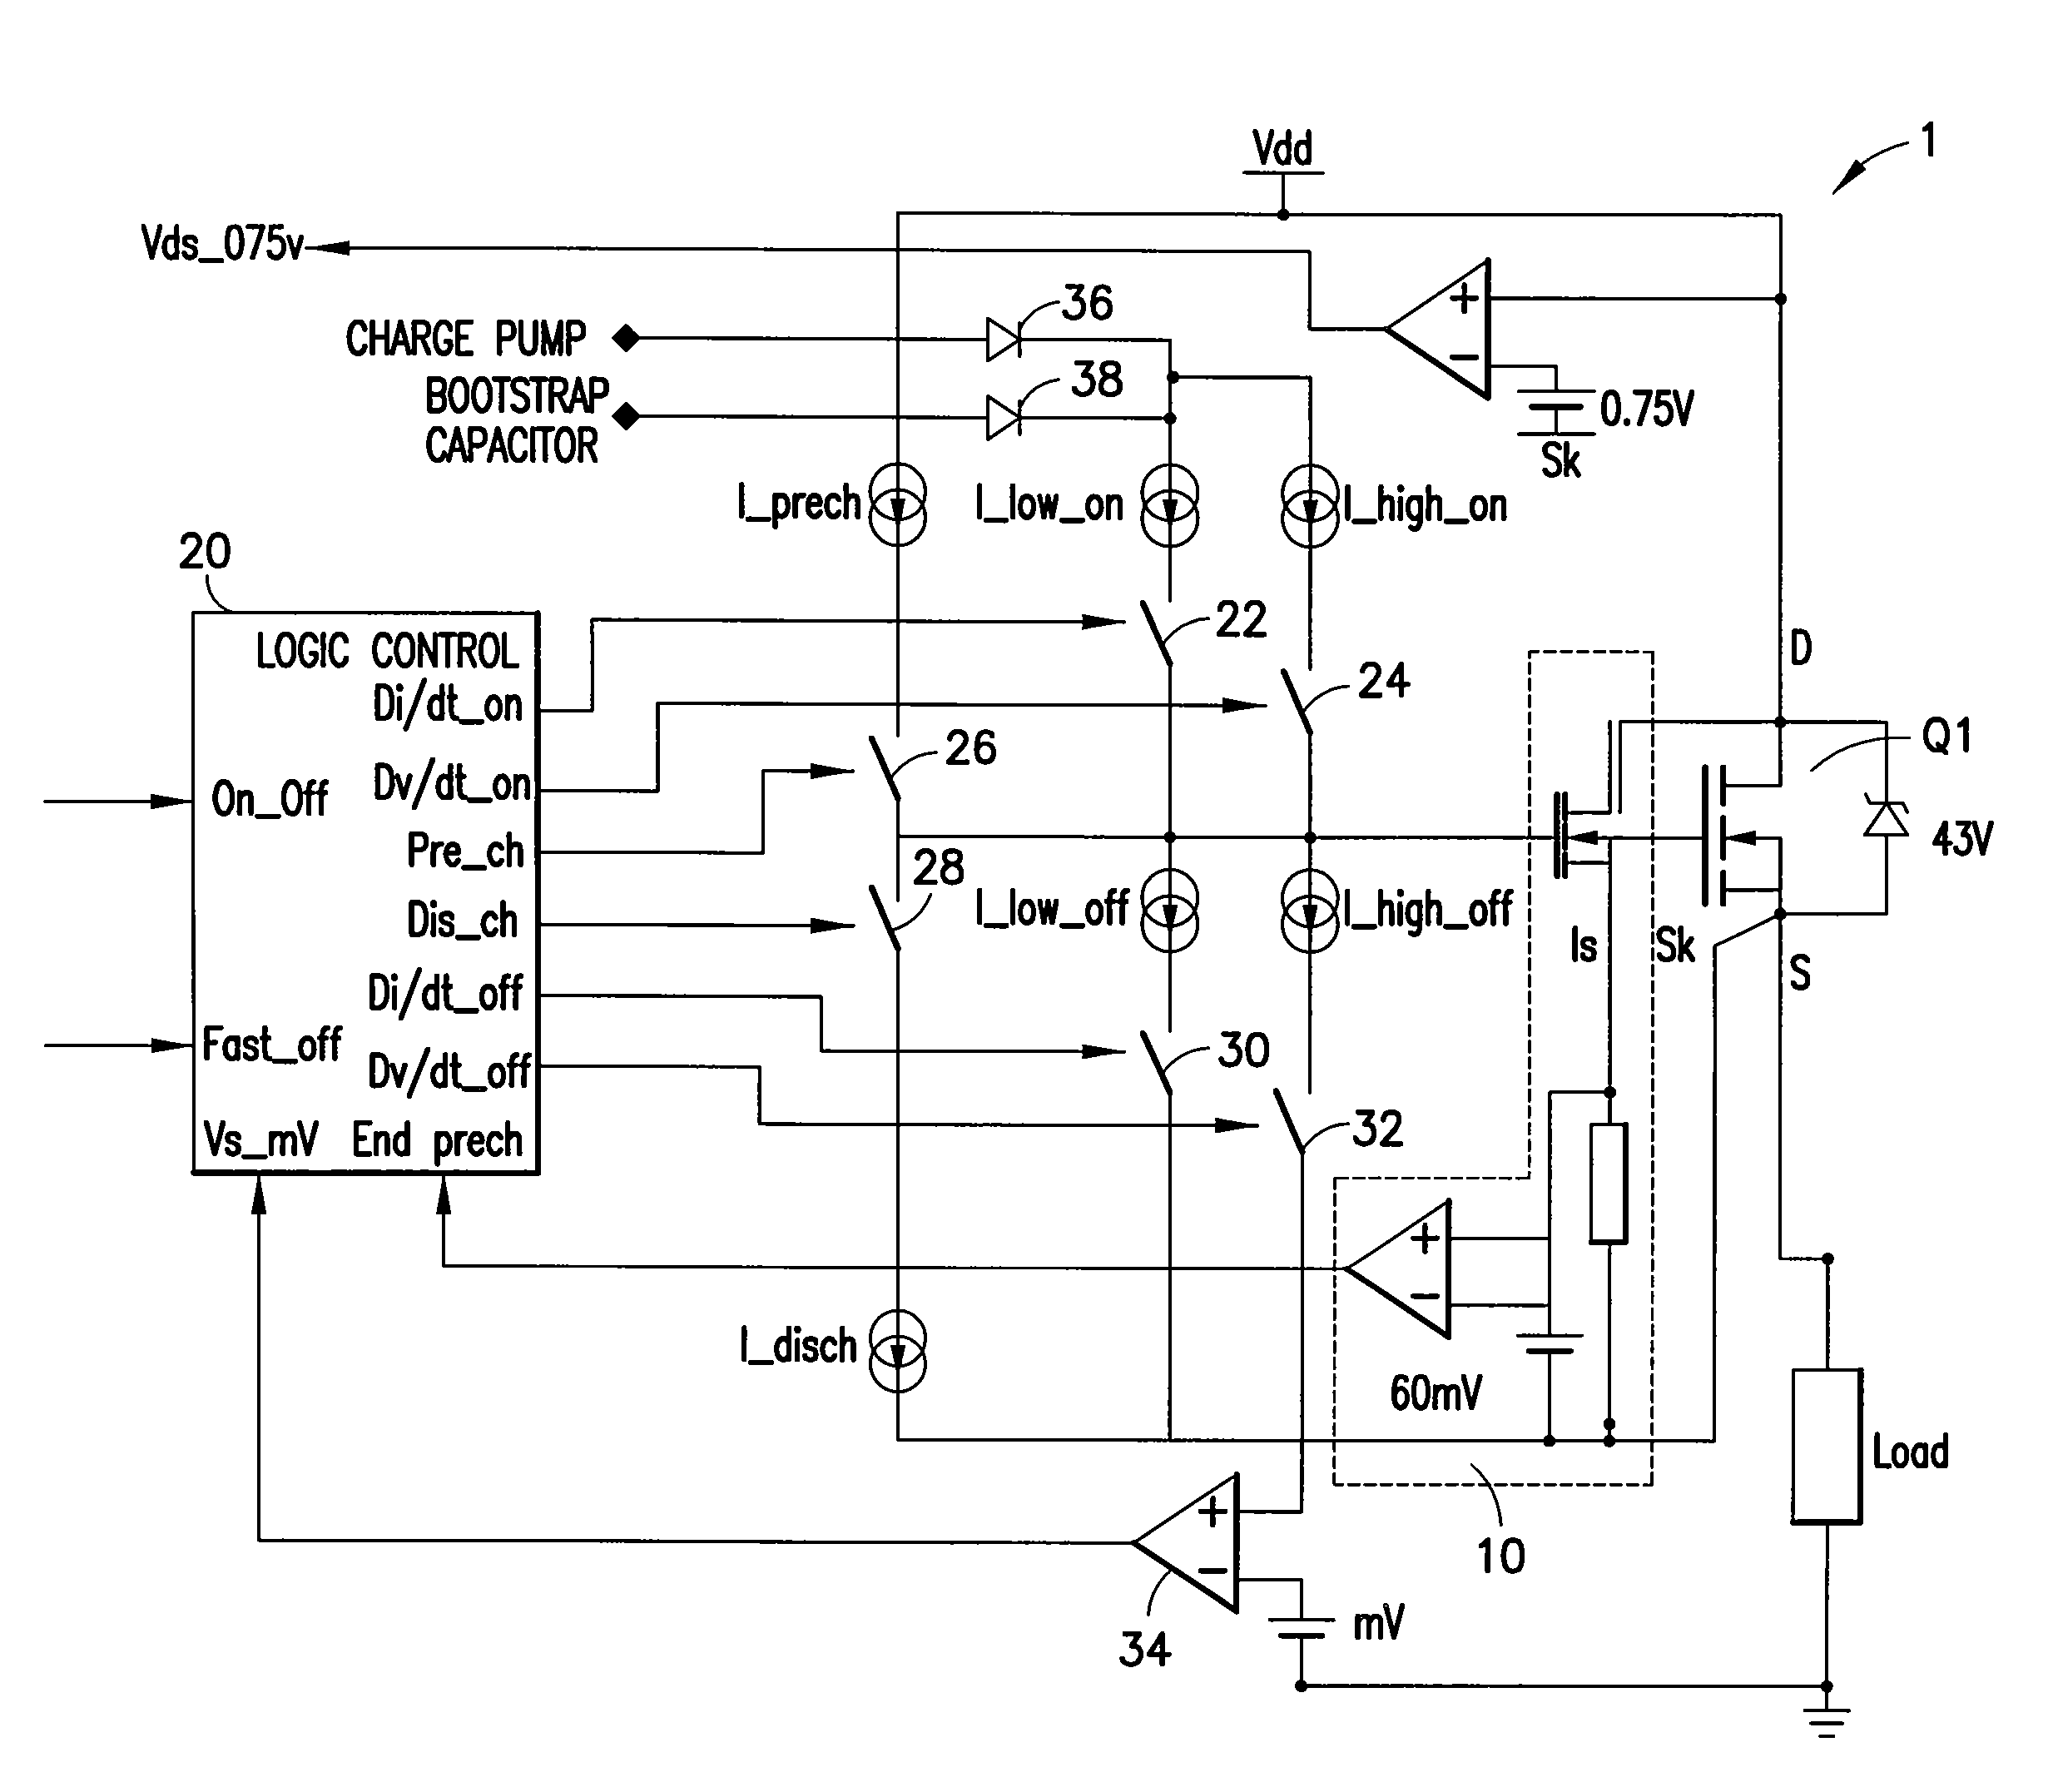 DC brushed motor drive with circuit to reduce di/dt and emi, for mosfet vth detection, voltage source detection, and overpower protection